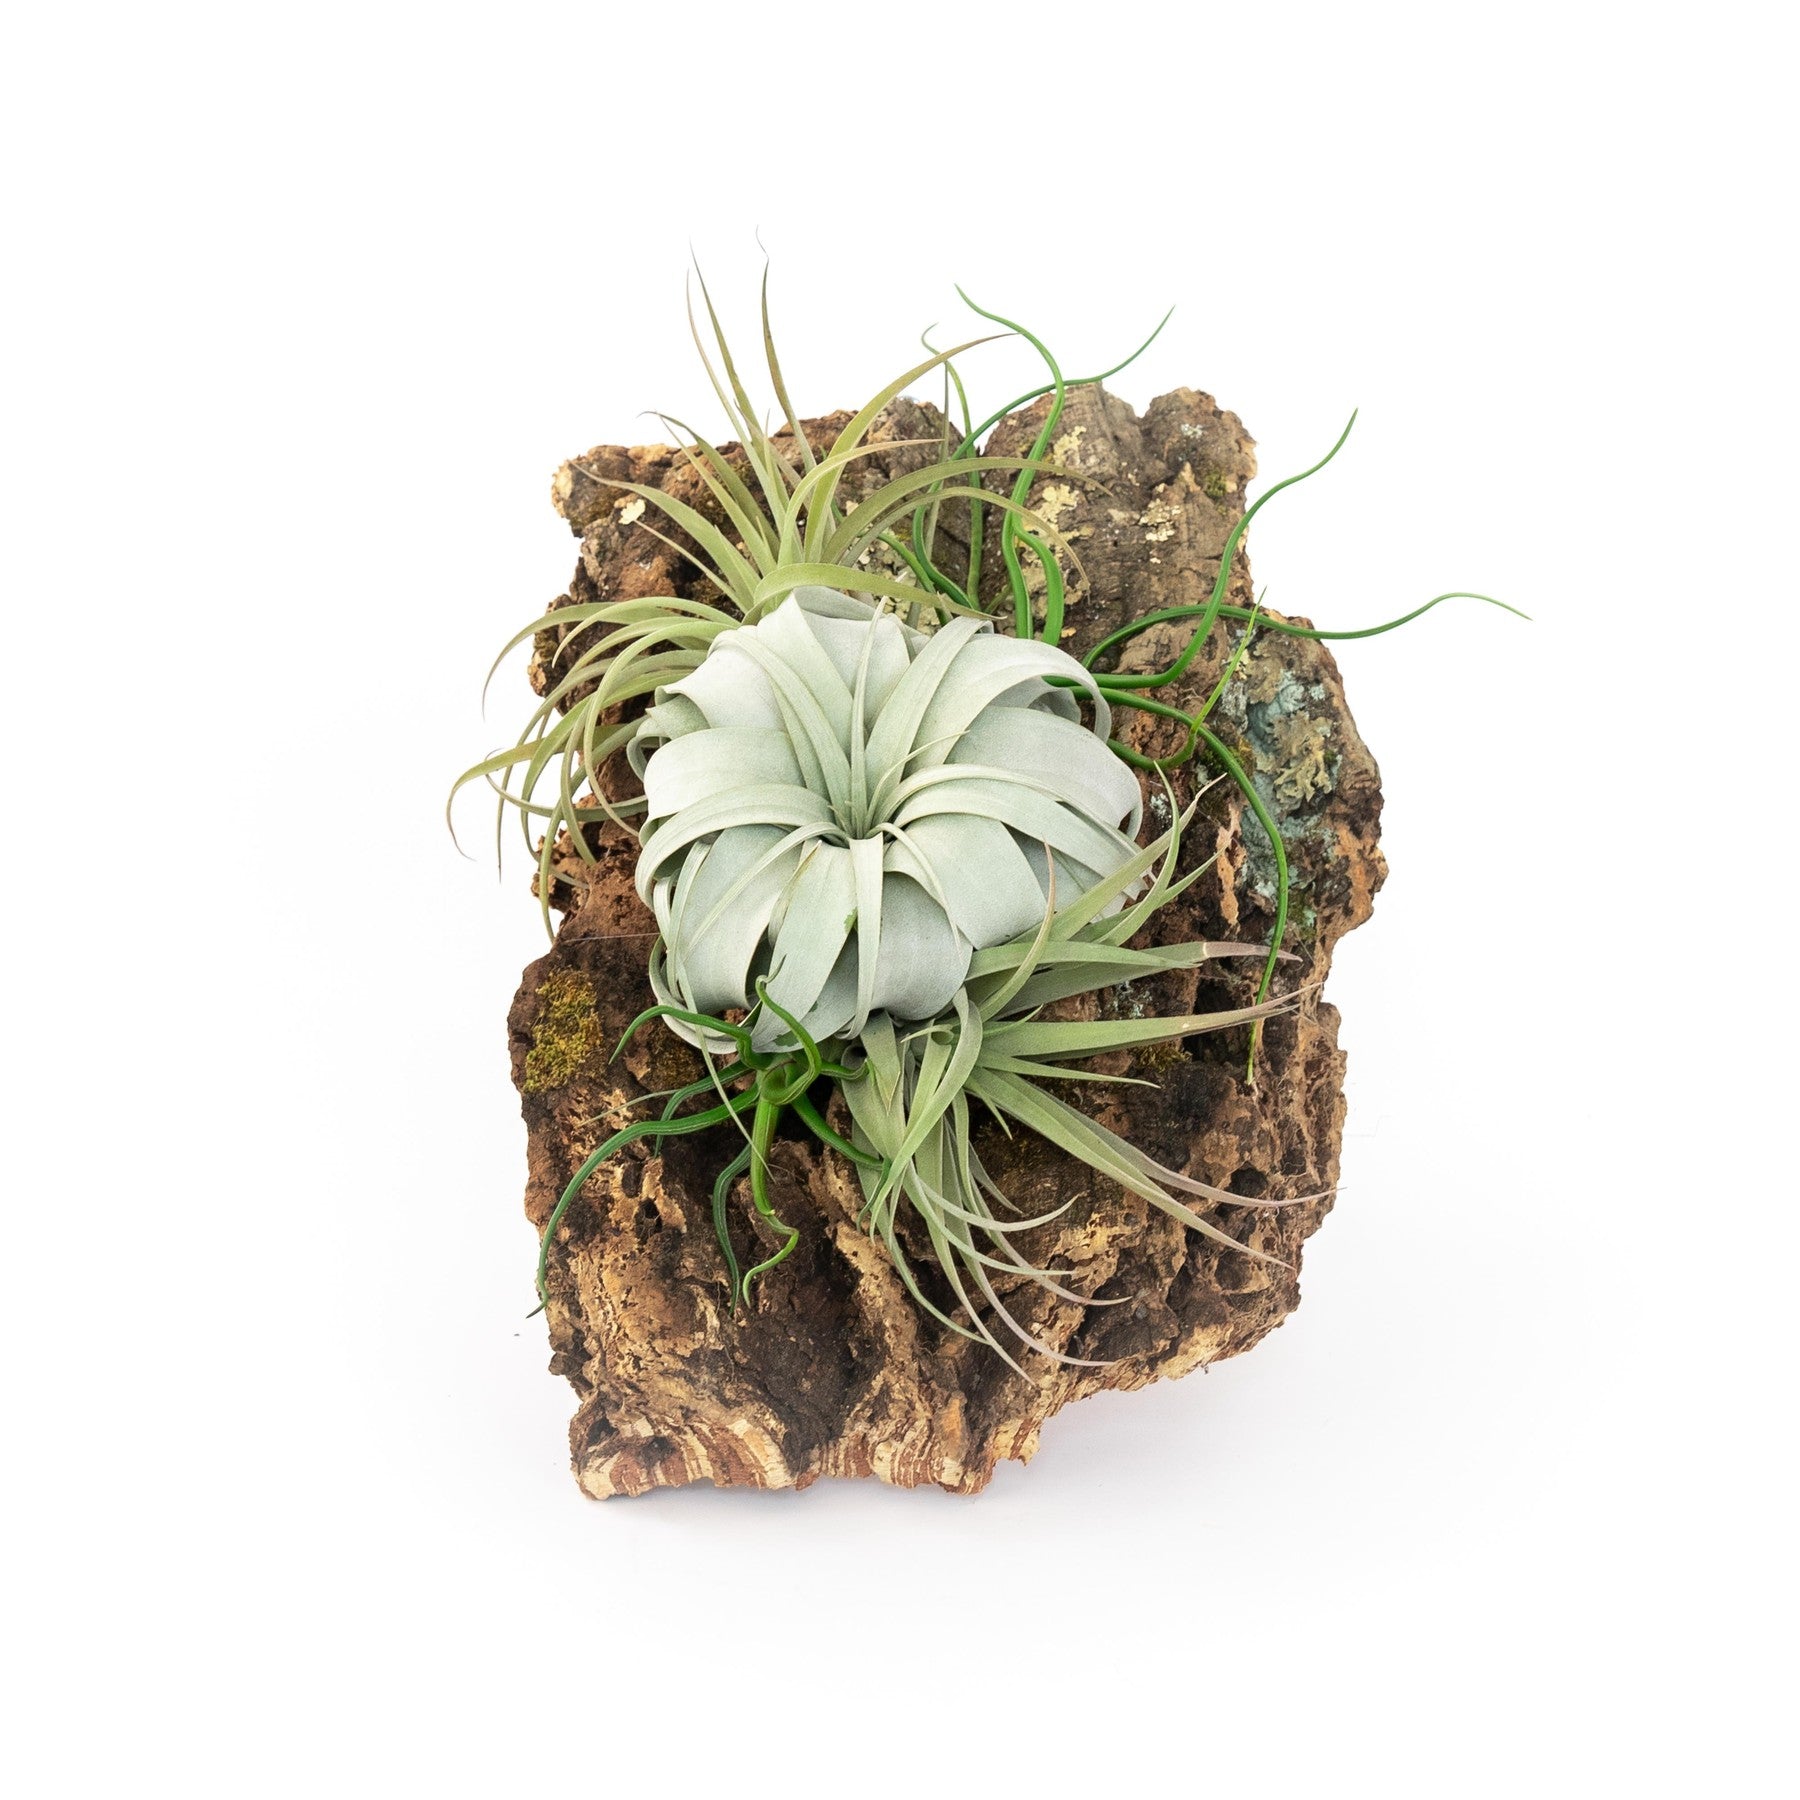 Large Cork Bark Display with 5 Tillandsia Air Plants & Waterproof Glue - About 10 X 16 Inches-terrarium-The Succulent Source